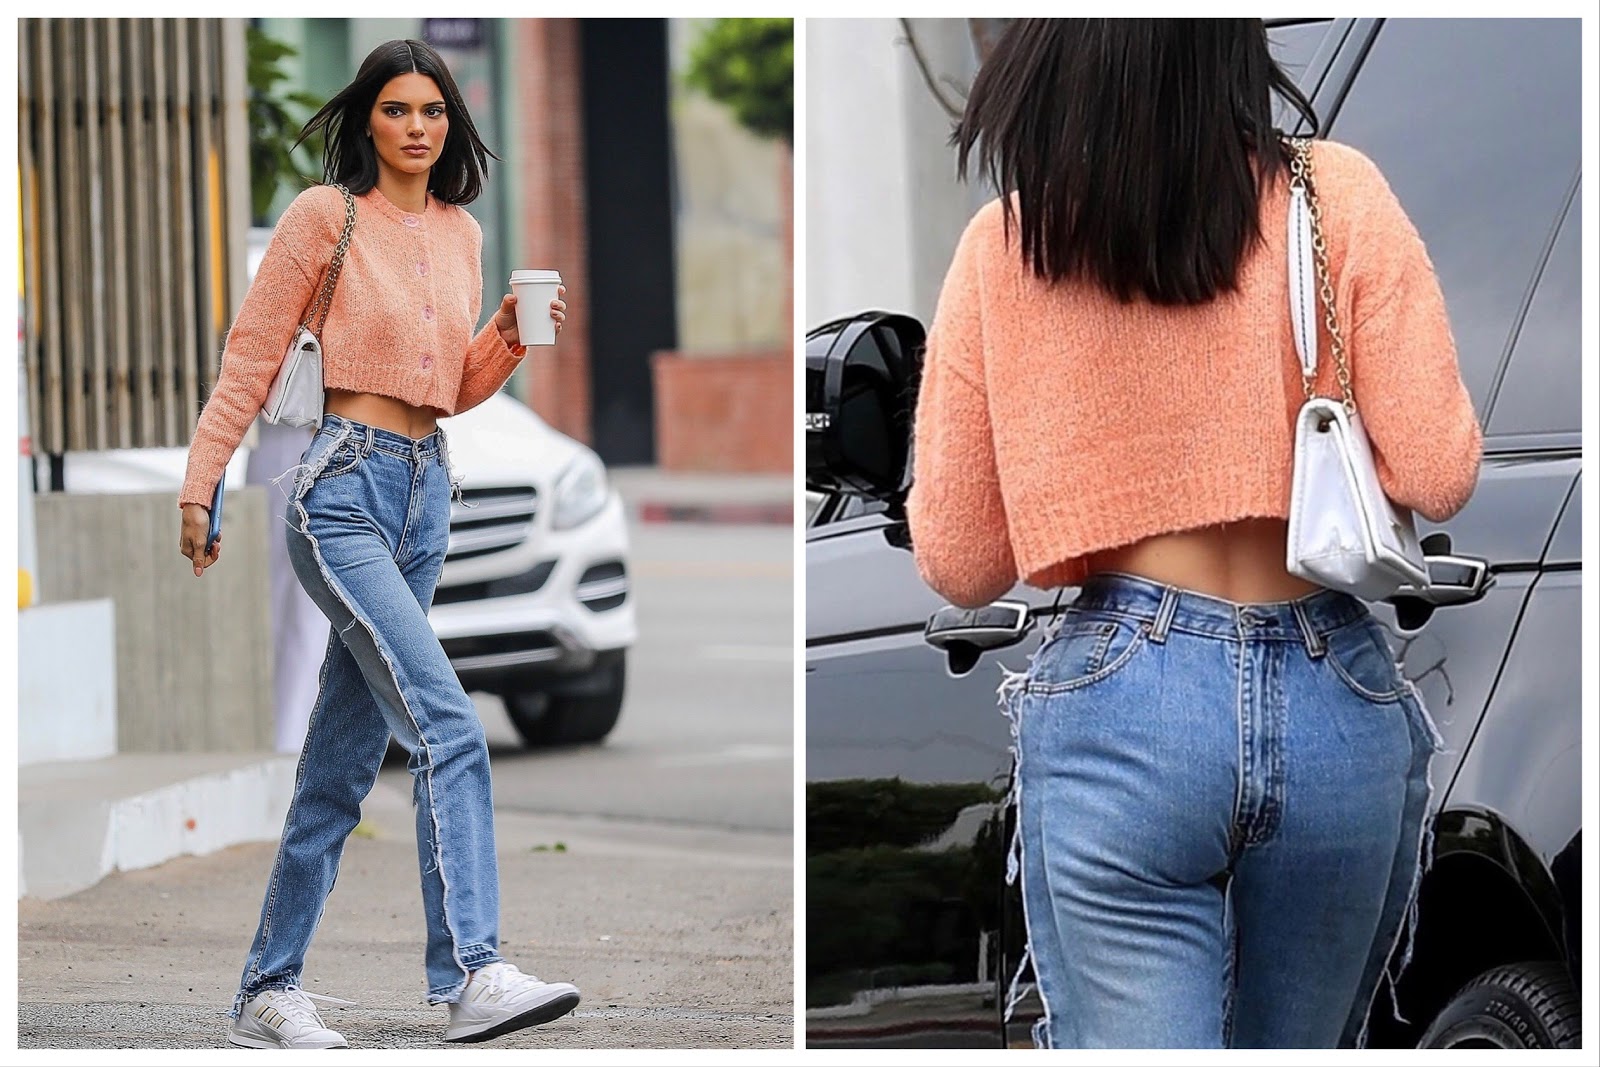 Kendall Jenner's jeans has the world divided. 